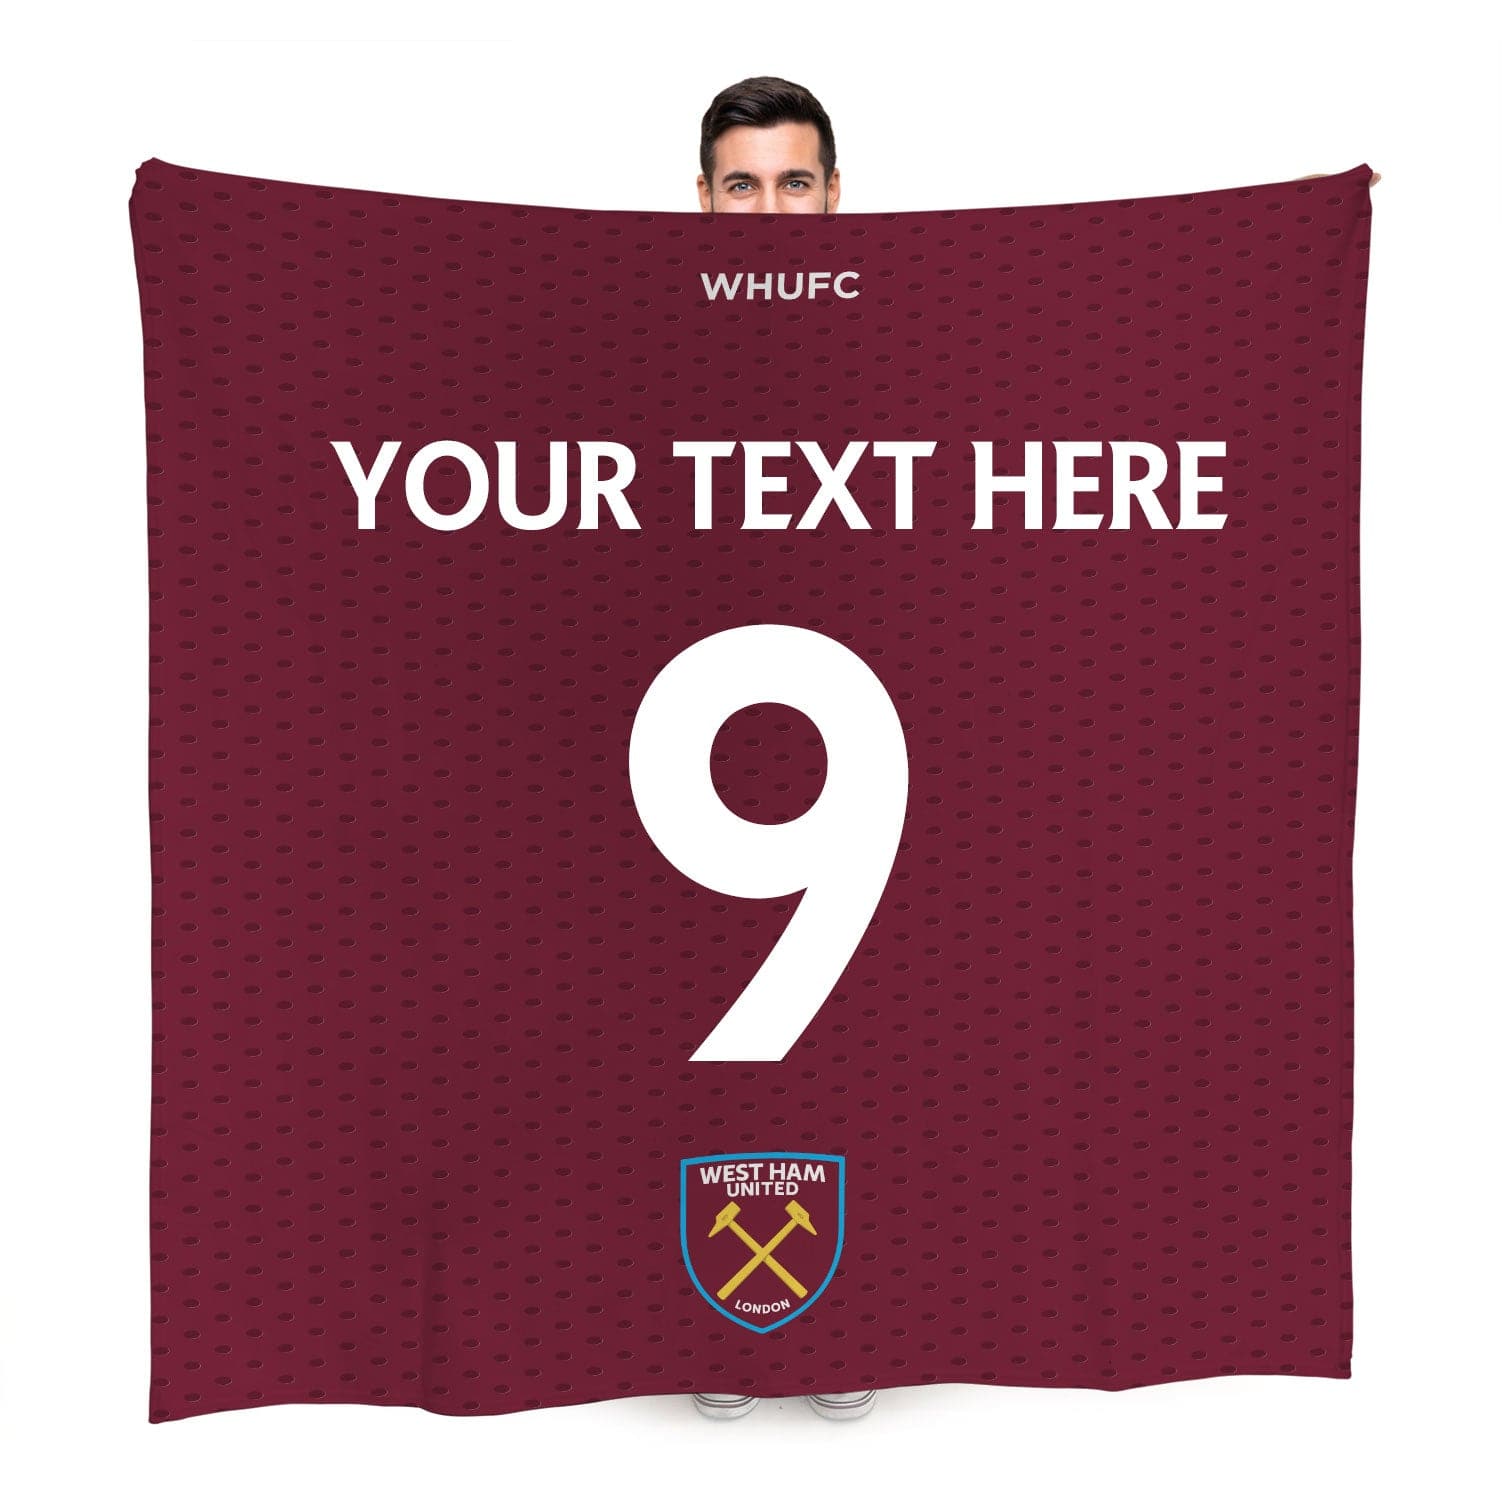 West Ham United FC - Name and Number Fleece Blanket - Officially Licenced